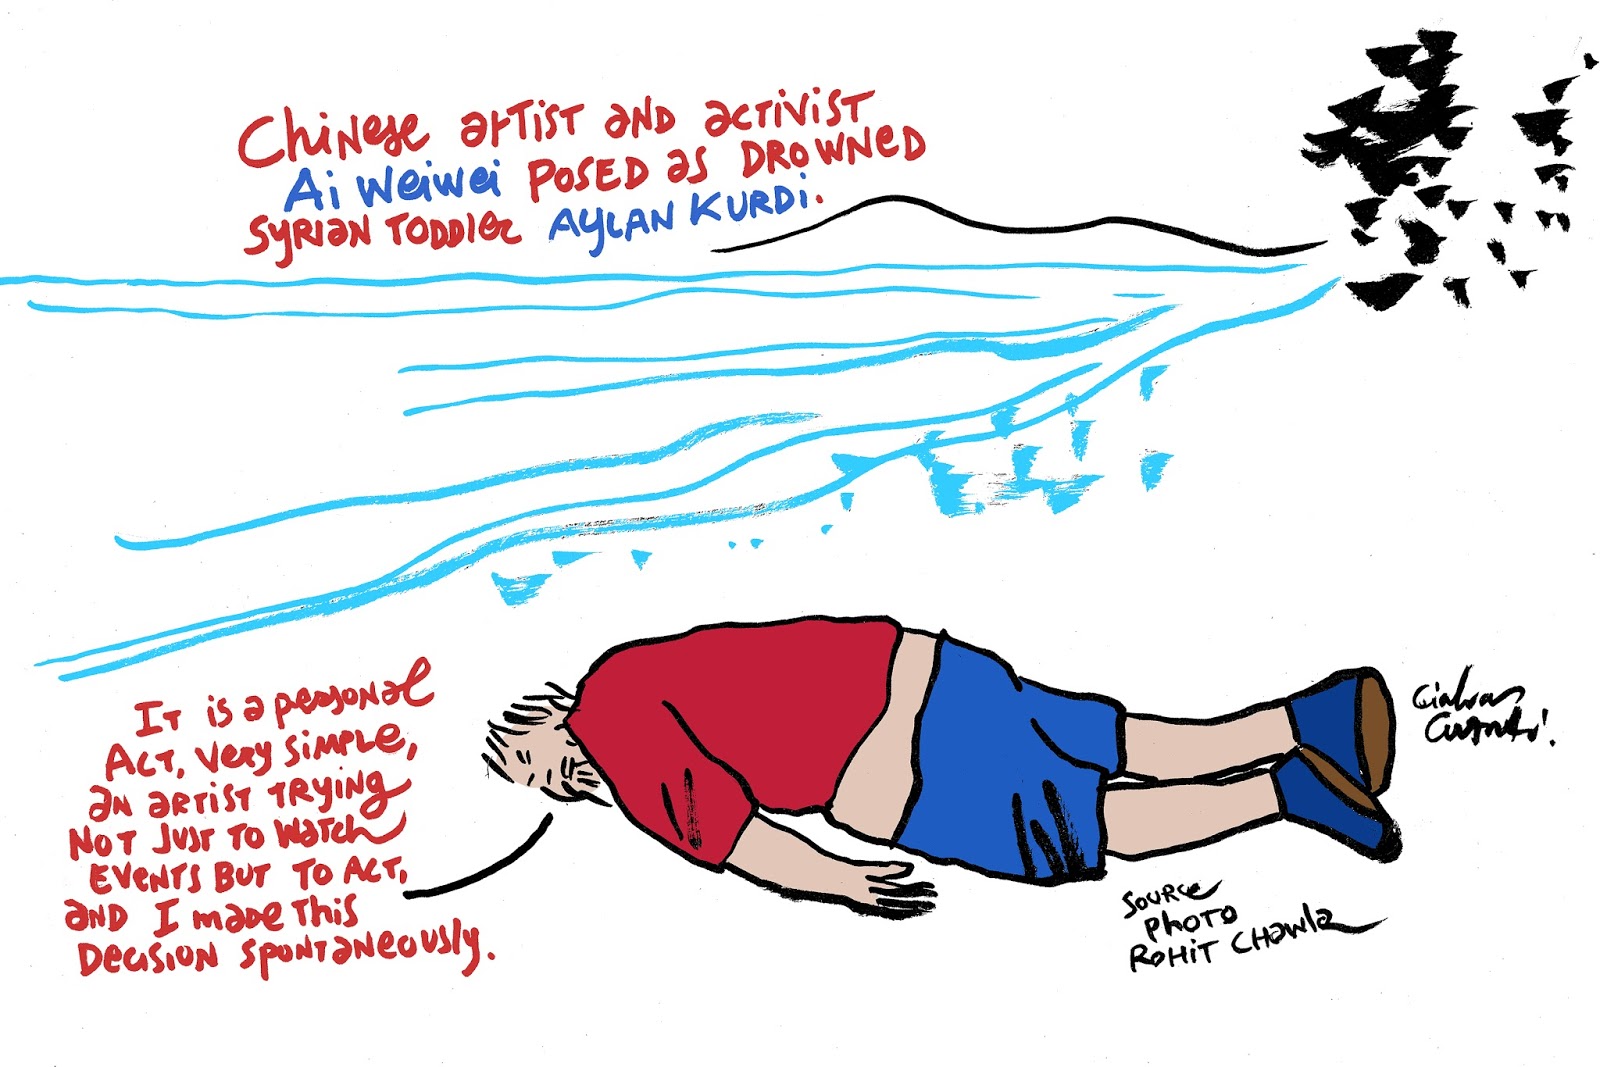 Channeldraw: Chinese artist and activist Ai Weiwei poses 